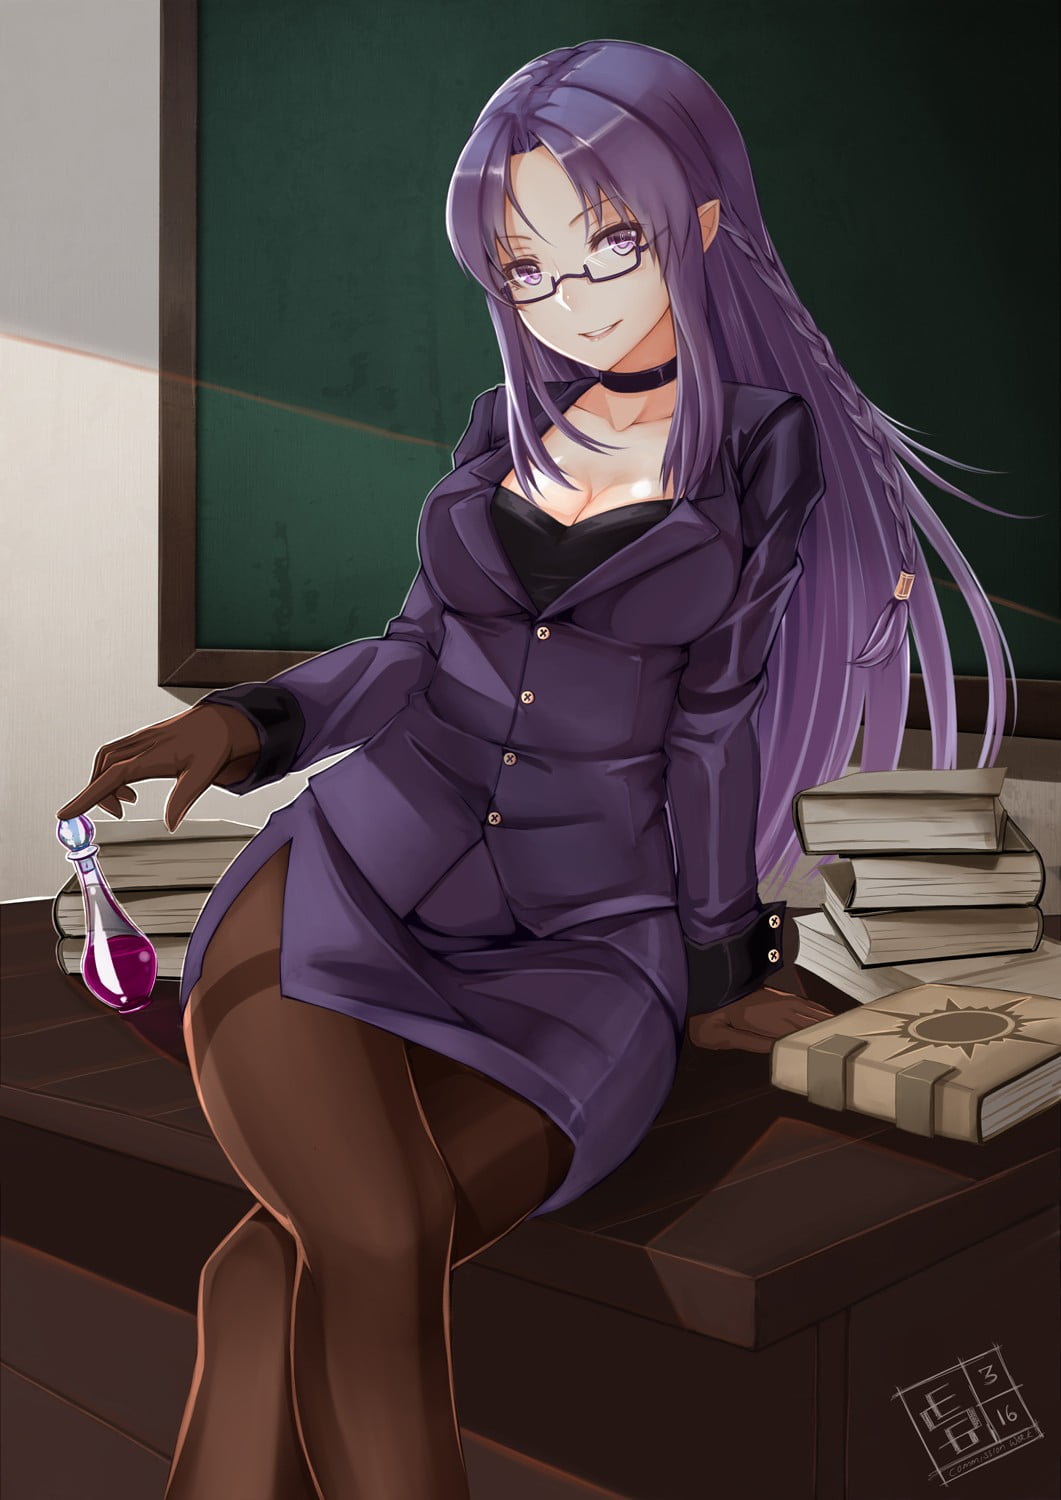 Purple Haired Female Anime Character Illustration Caster Fate Stay Night Fate Series